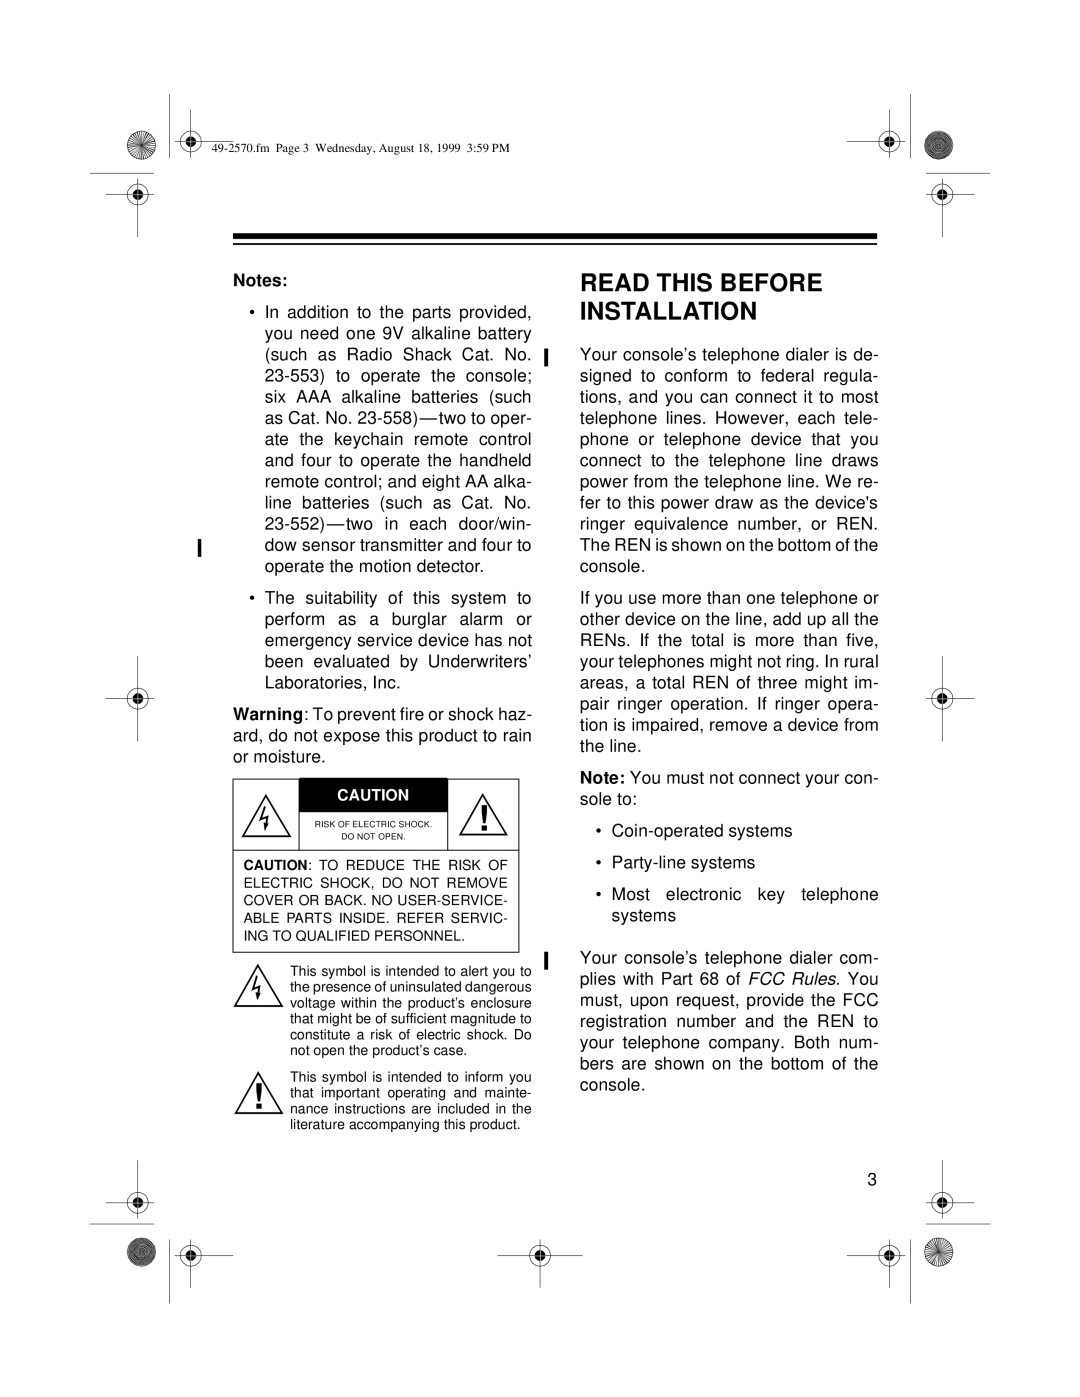 Radio Shack 49-2570 owner manual Read This Before Installation 